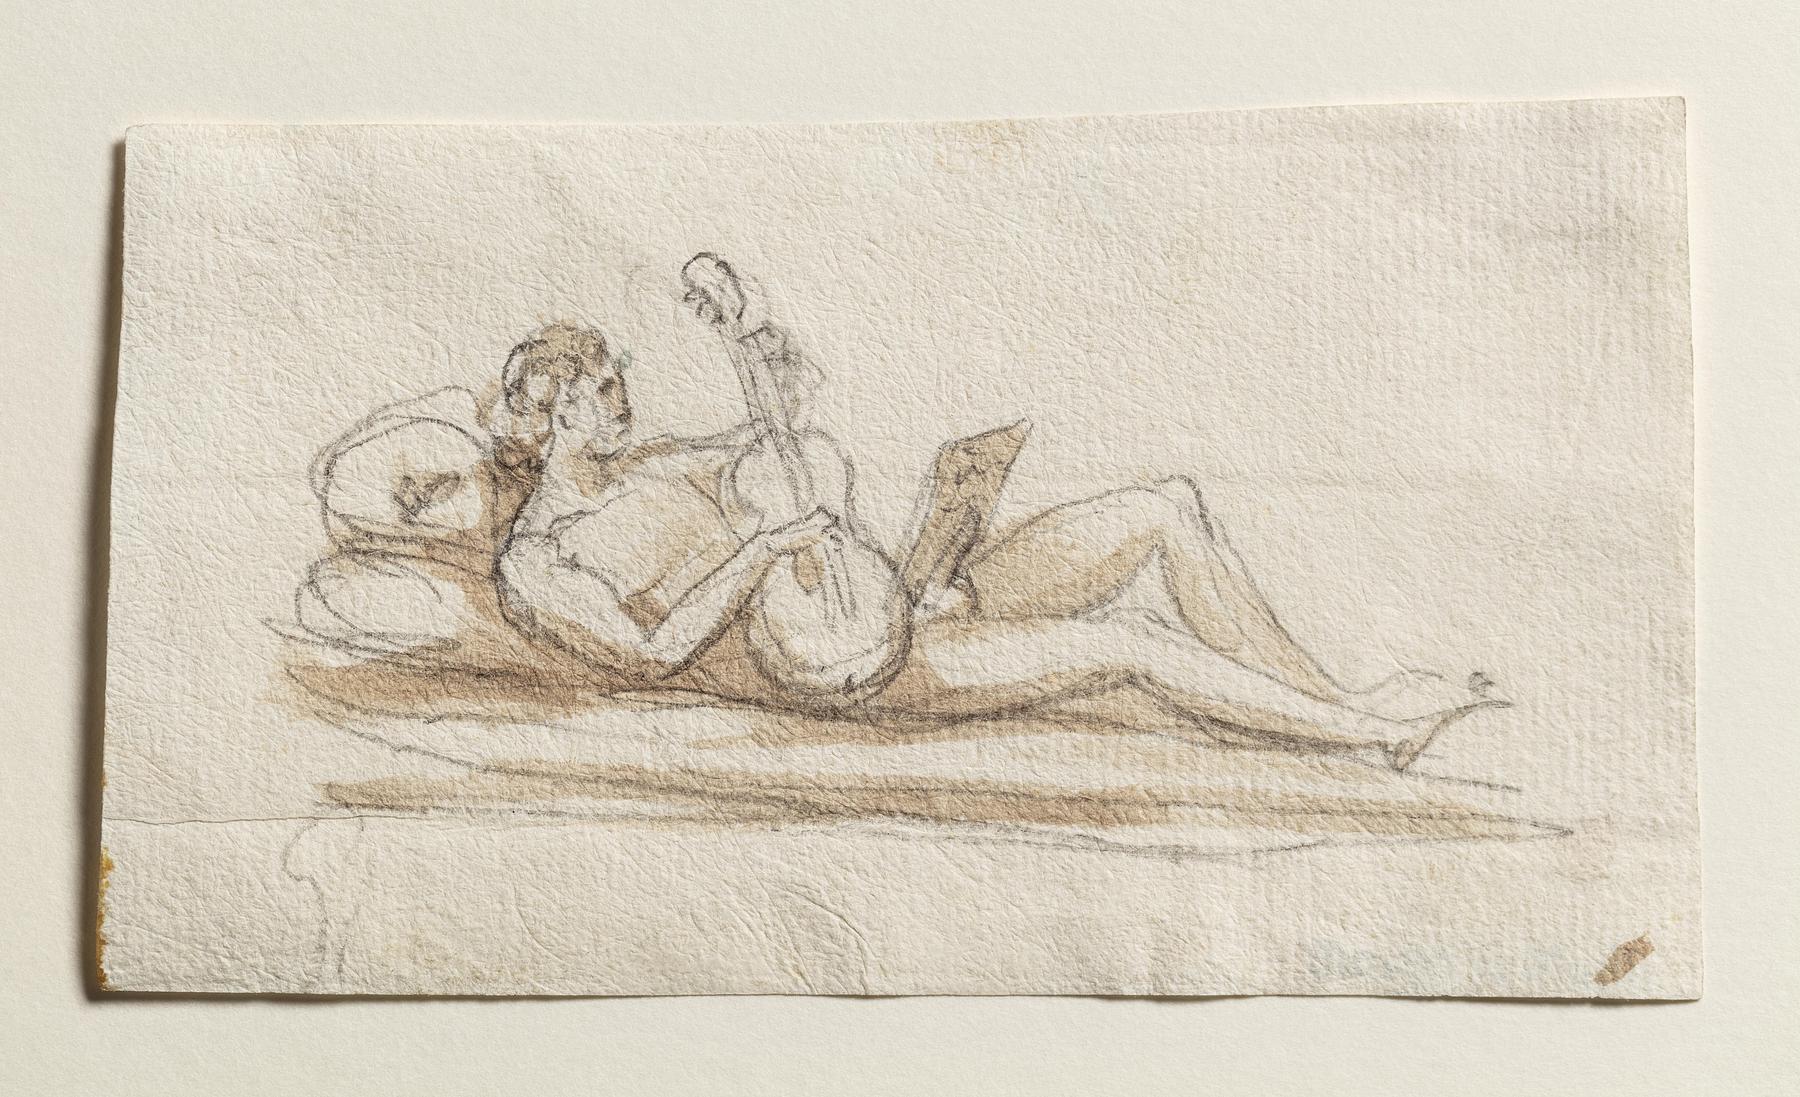 Reclining male figure playing the guitar, C903